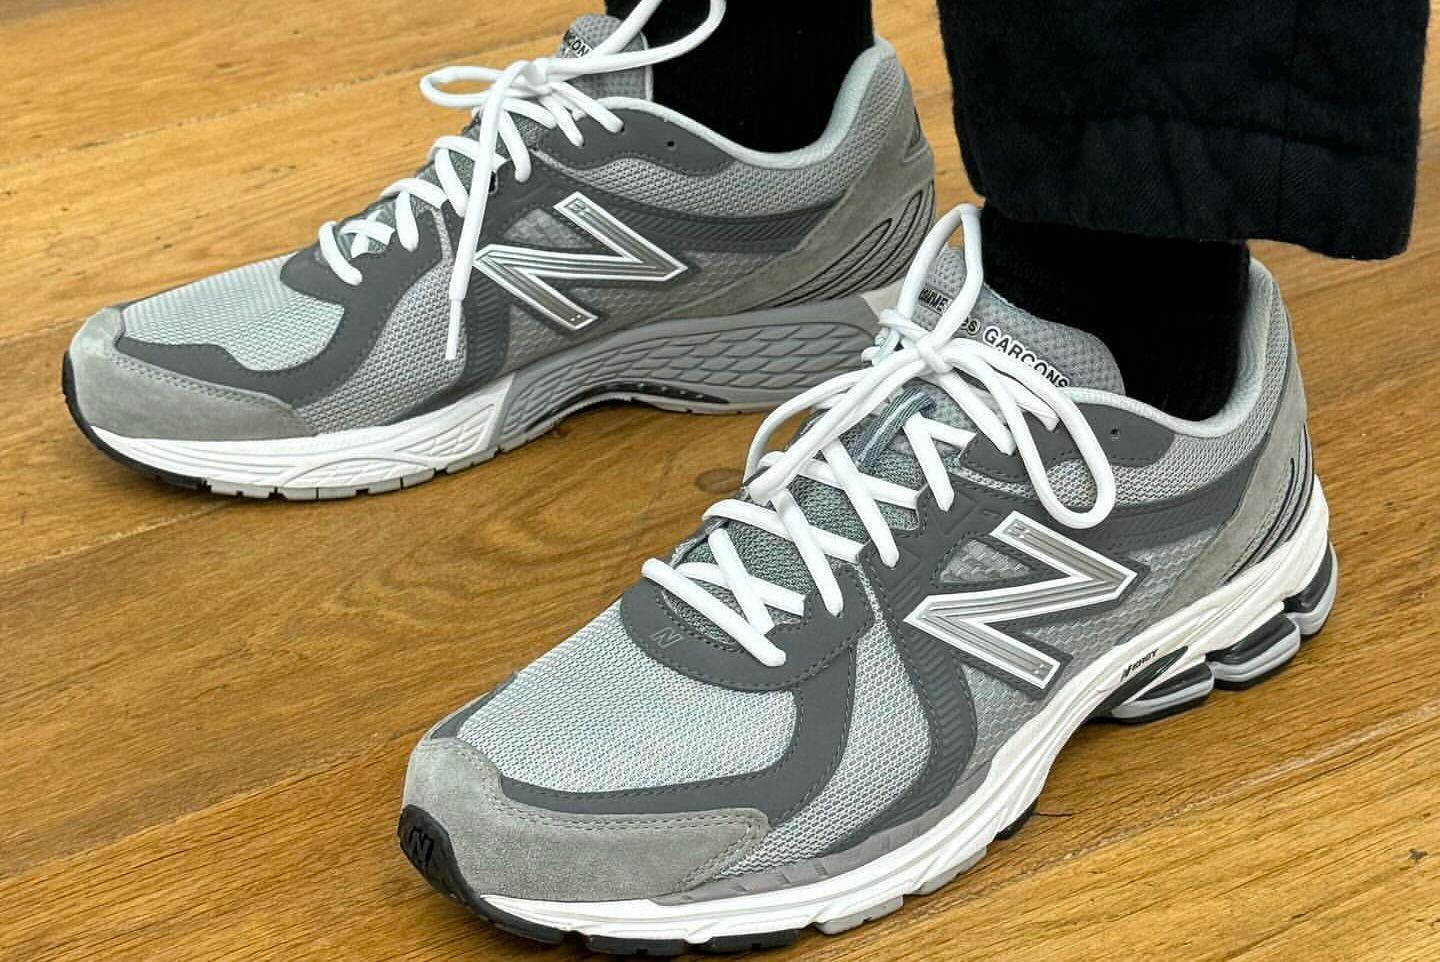 Your First Look at the Comme des Garçons HOMME x New Balance 860v2 ...